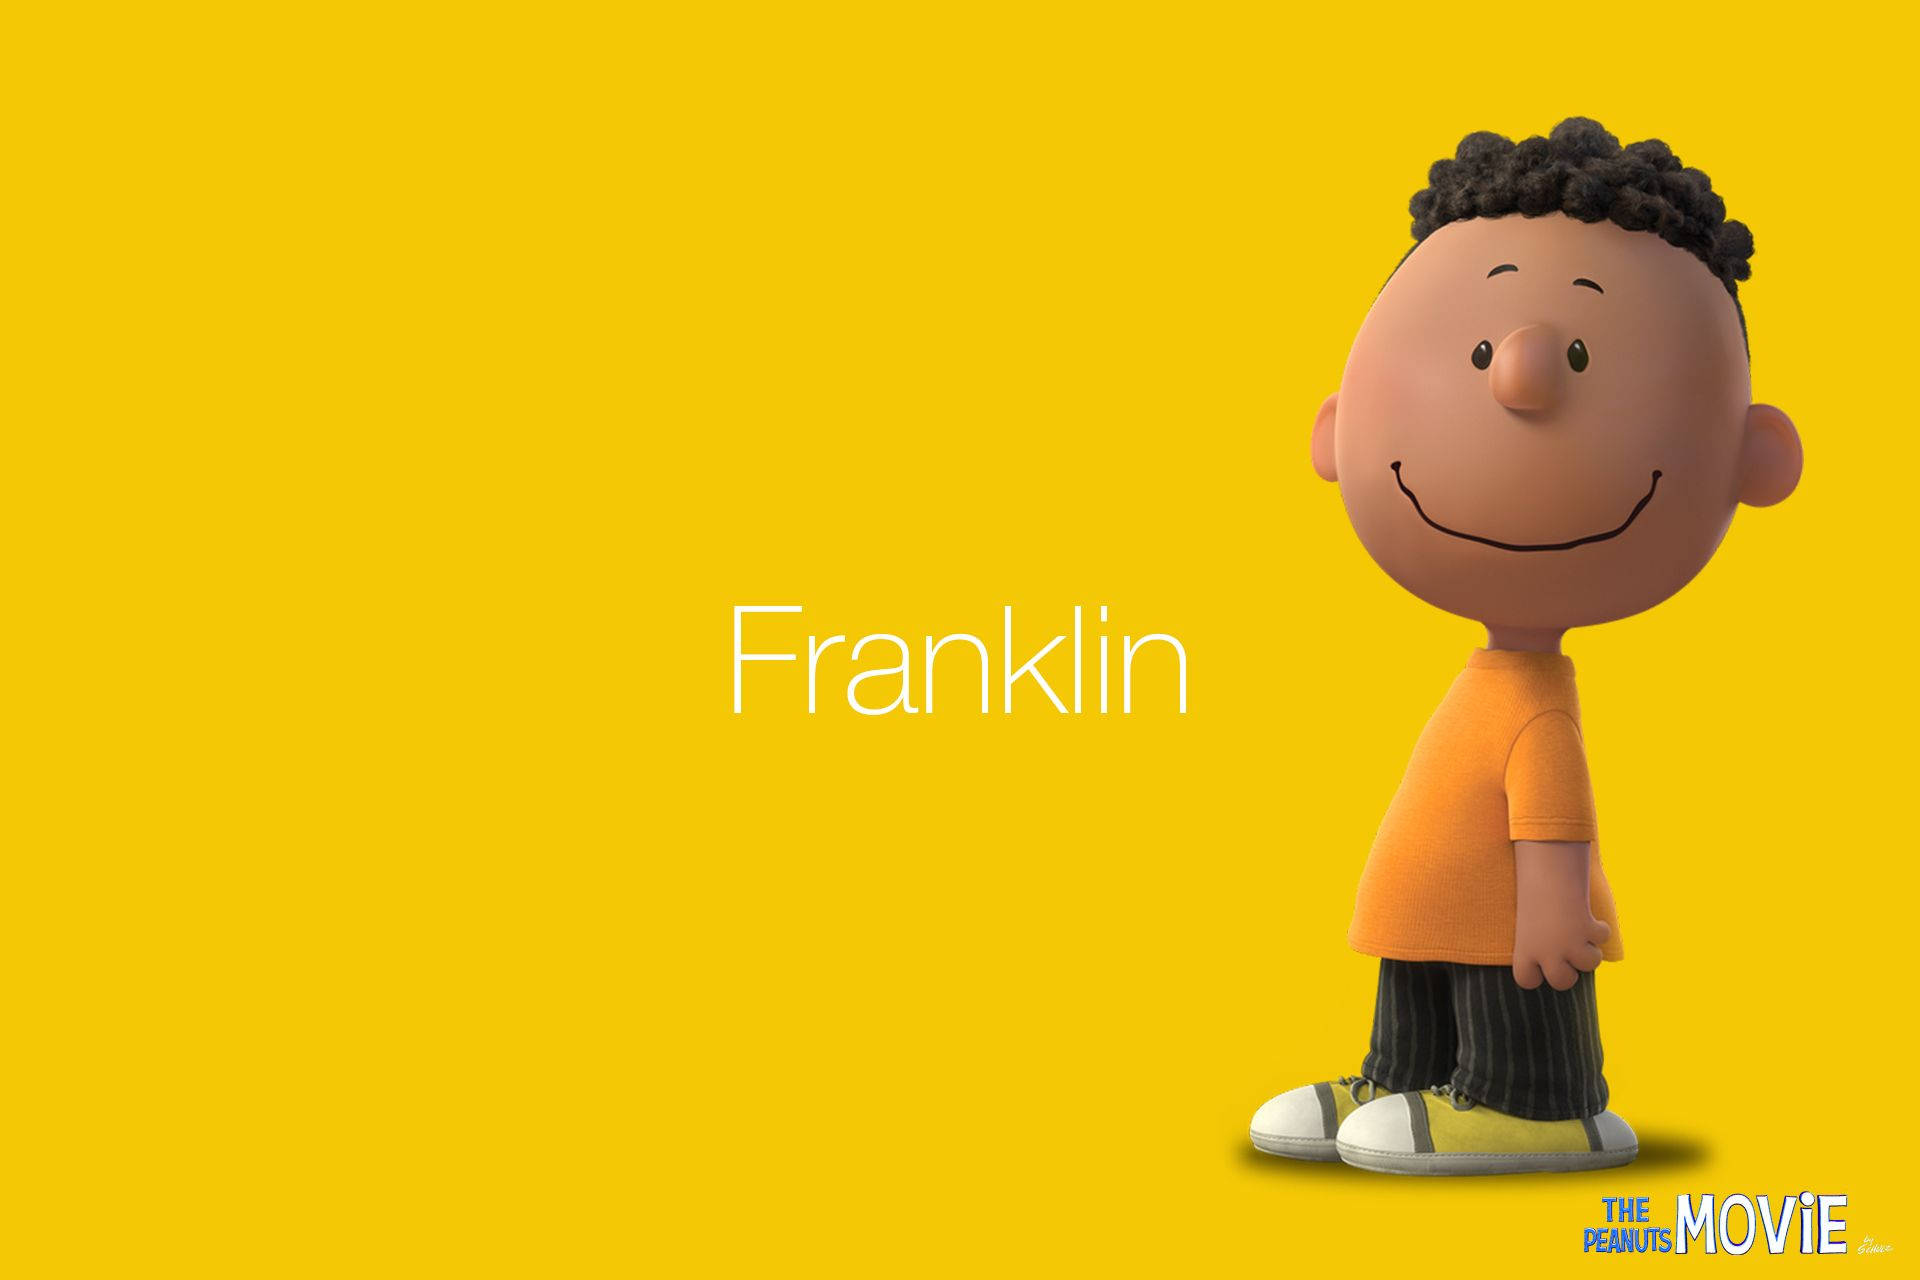 Download Franklin From The Peanuts Movie Wallpaper 